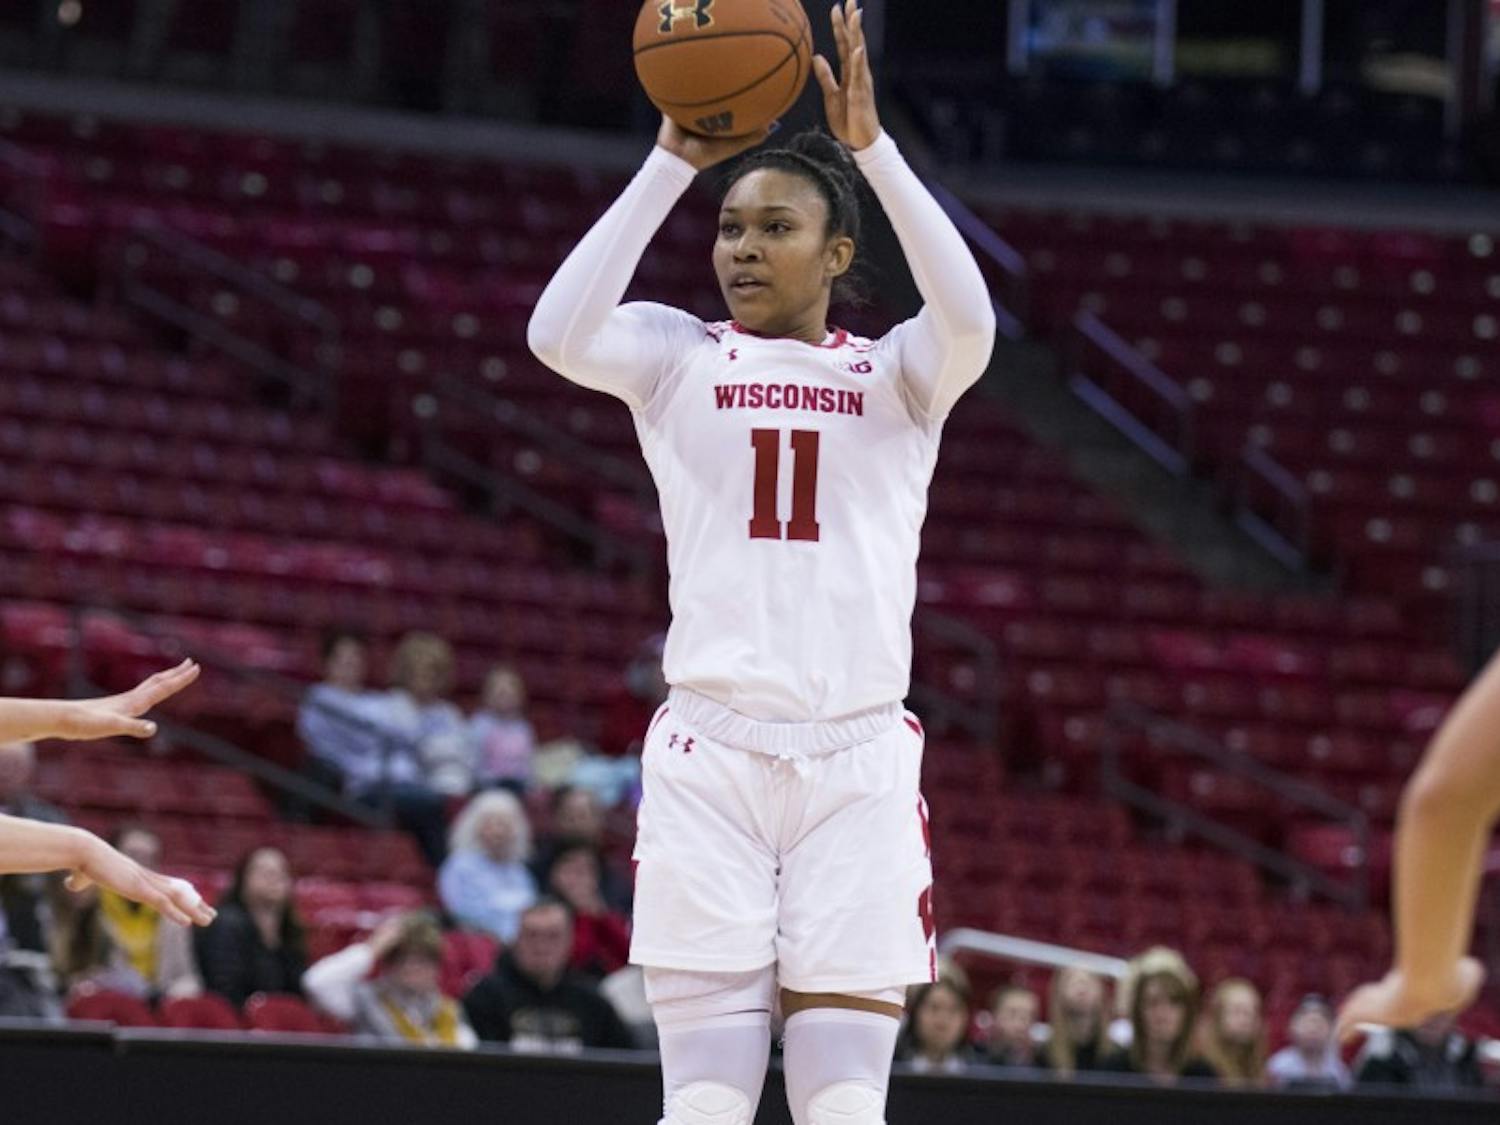 Senior forward&nbsp;Marsha Howard recently became the seventh Wisconsin player to record 1,000 career points, and will finish her career at the Kohl Center Thursday night against Ohio State.